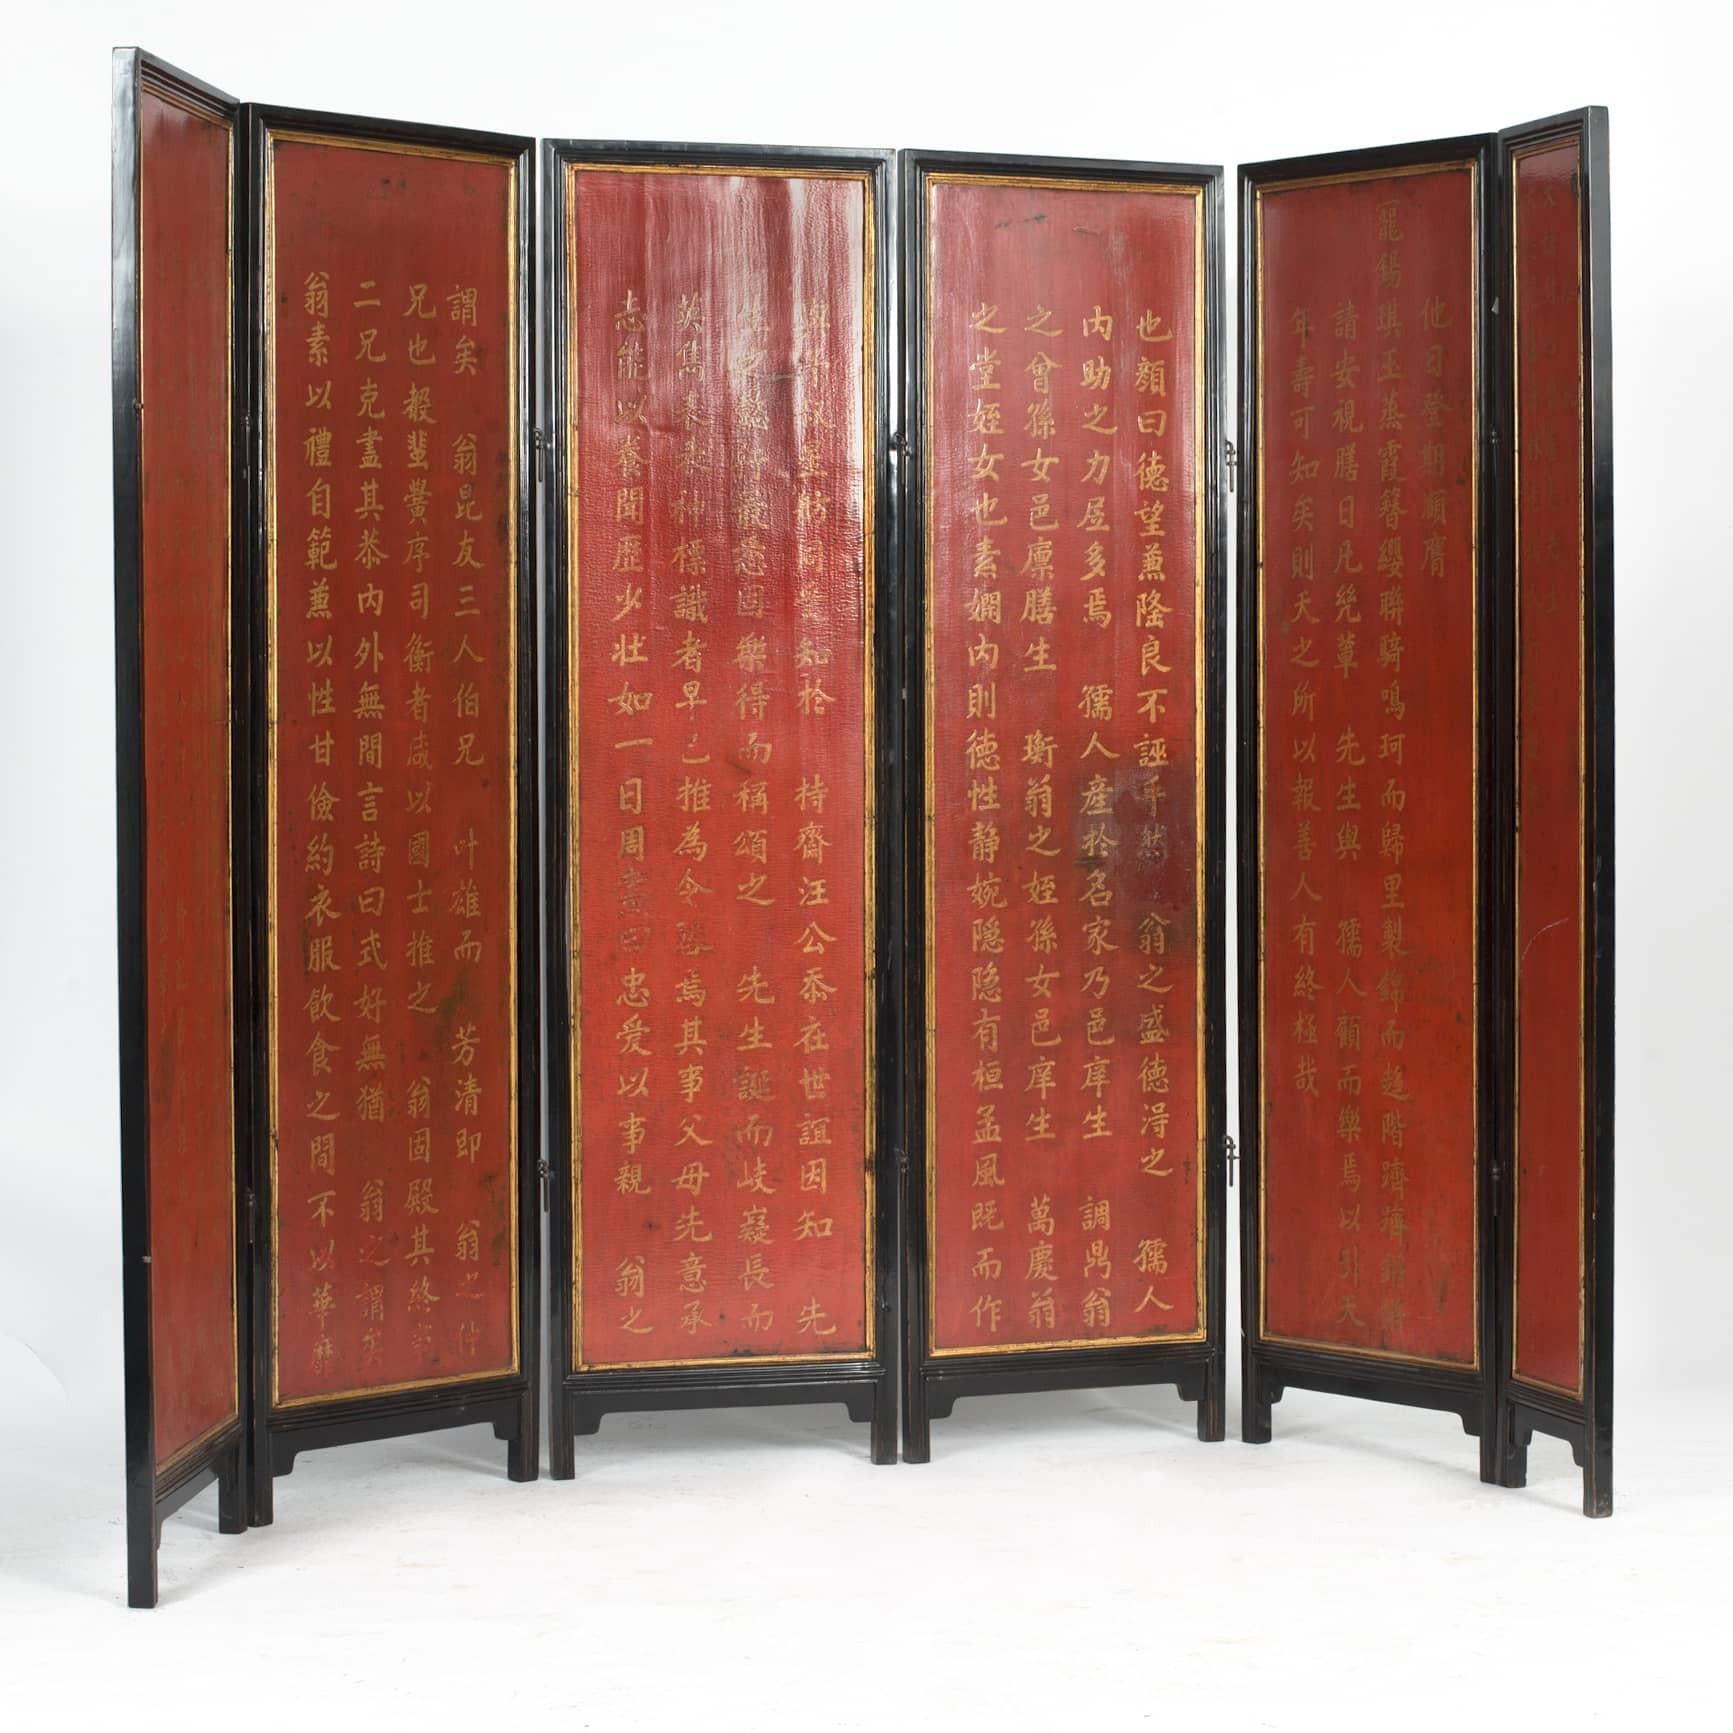 Rare screen/room divider.
Set of 10 (8 wide + 2 smaller) panels with original thick red lacquer with calligraphy in gold leaf.
Later frames in black lacquer with profiled leaf-gilded moldings
Fusian province China late 18th century.

Very